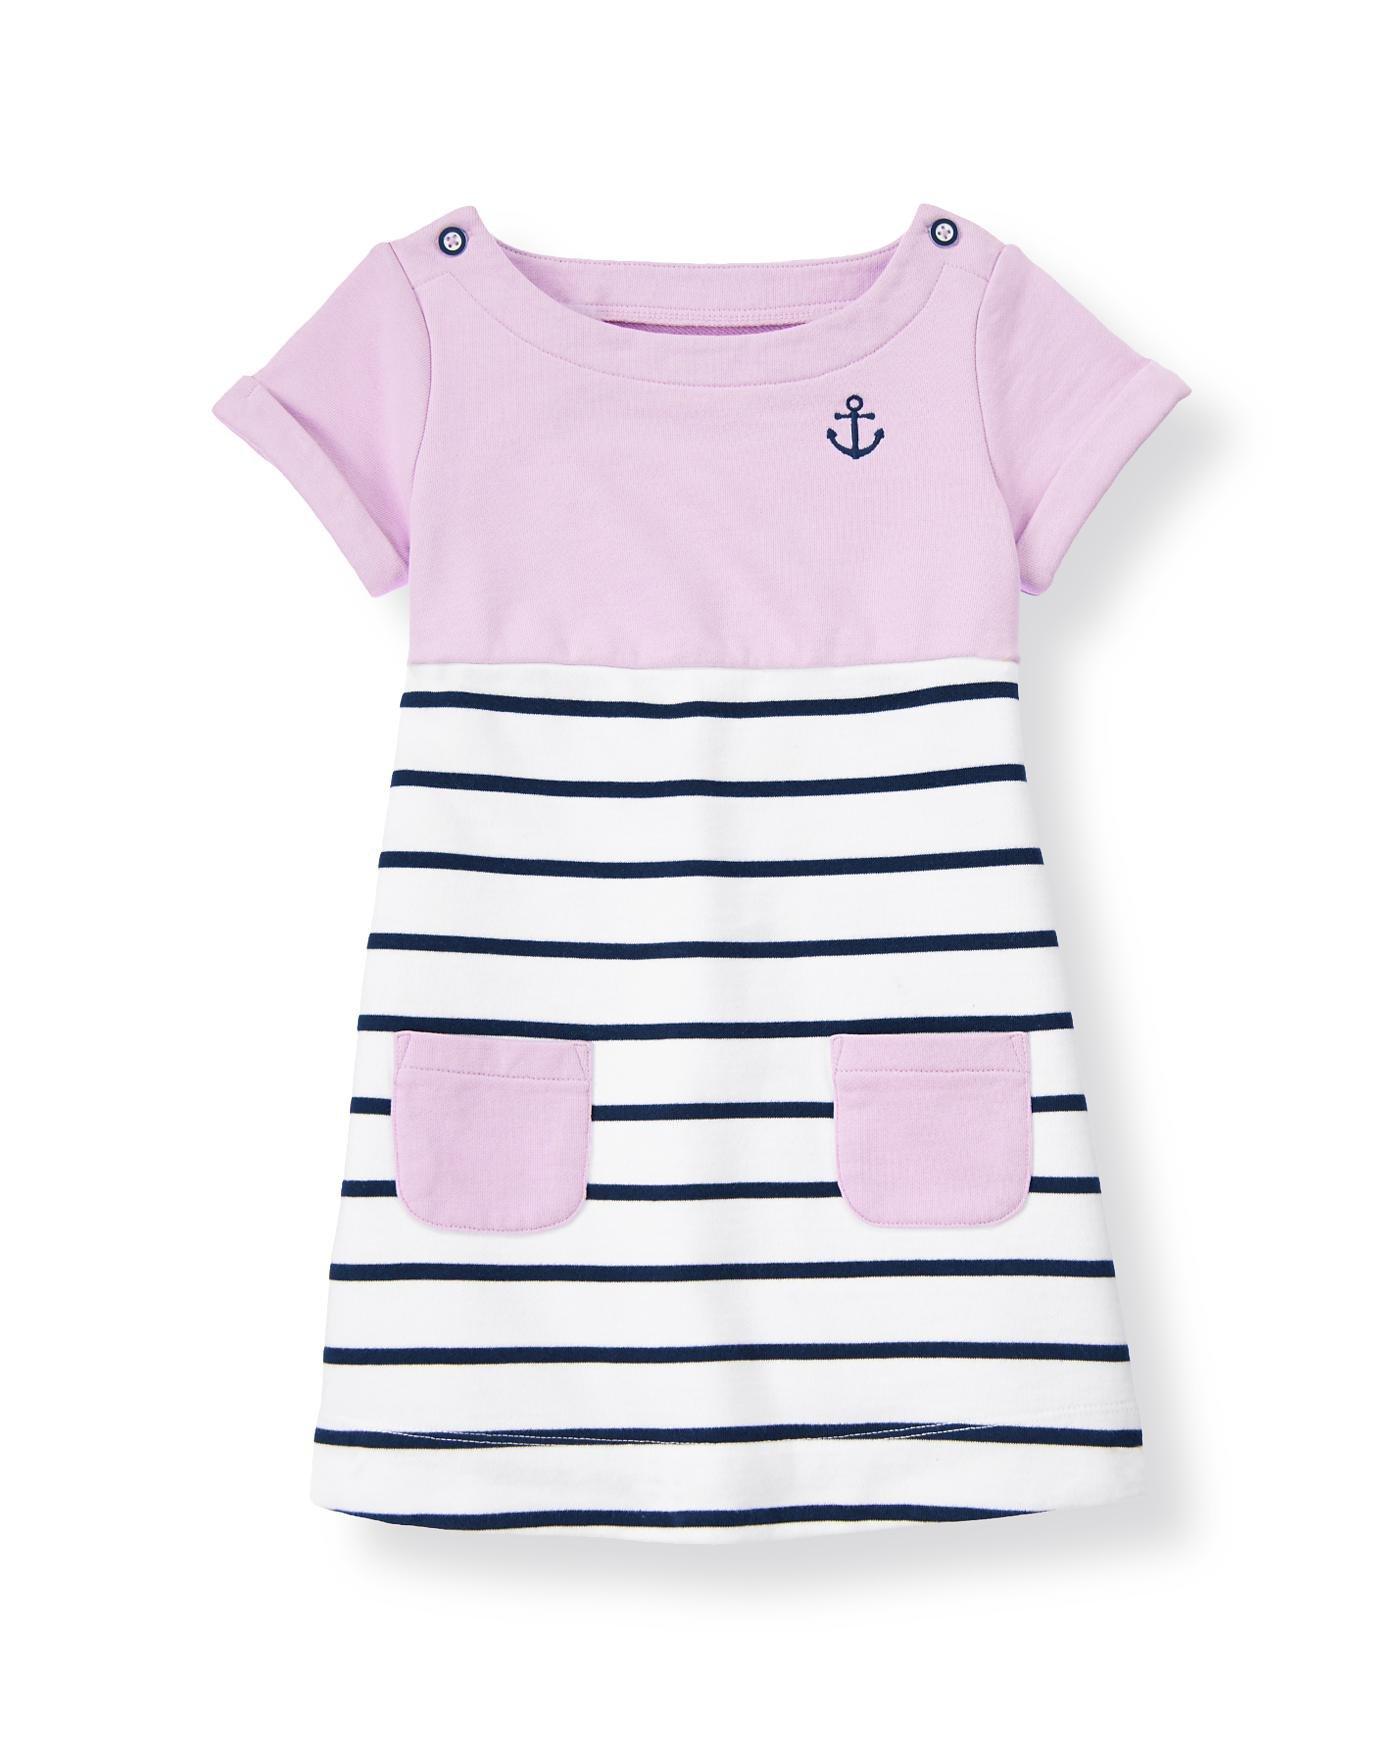 Anchor Striped Terry Dress image number 0